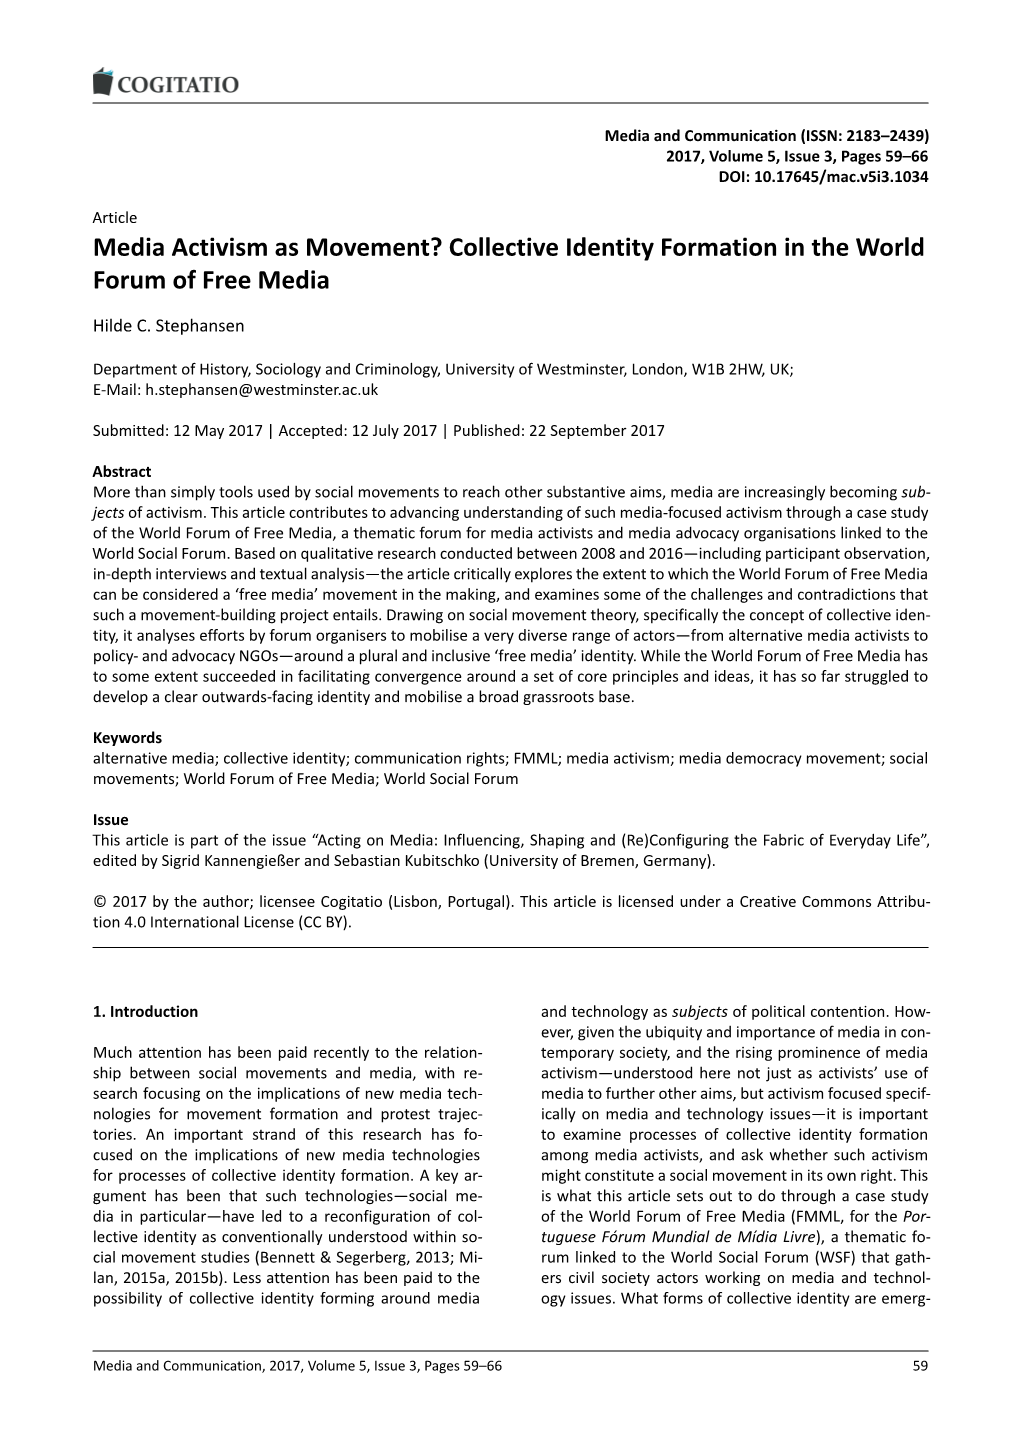 Collective Identity Formation in the World Forum of Free Media